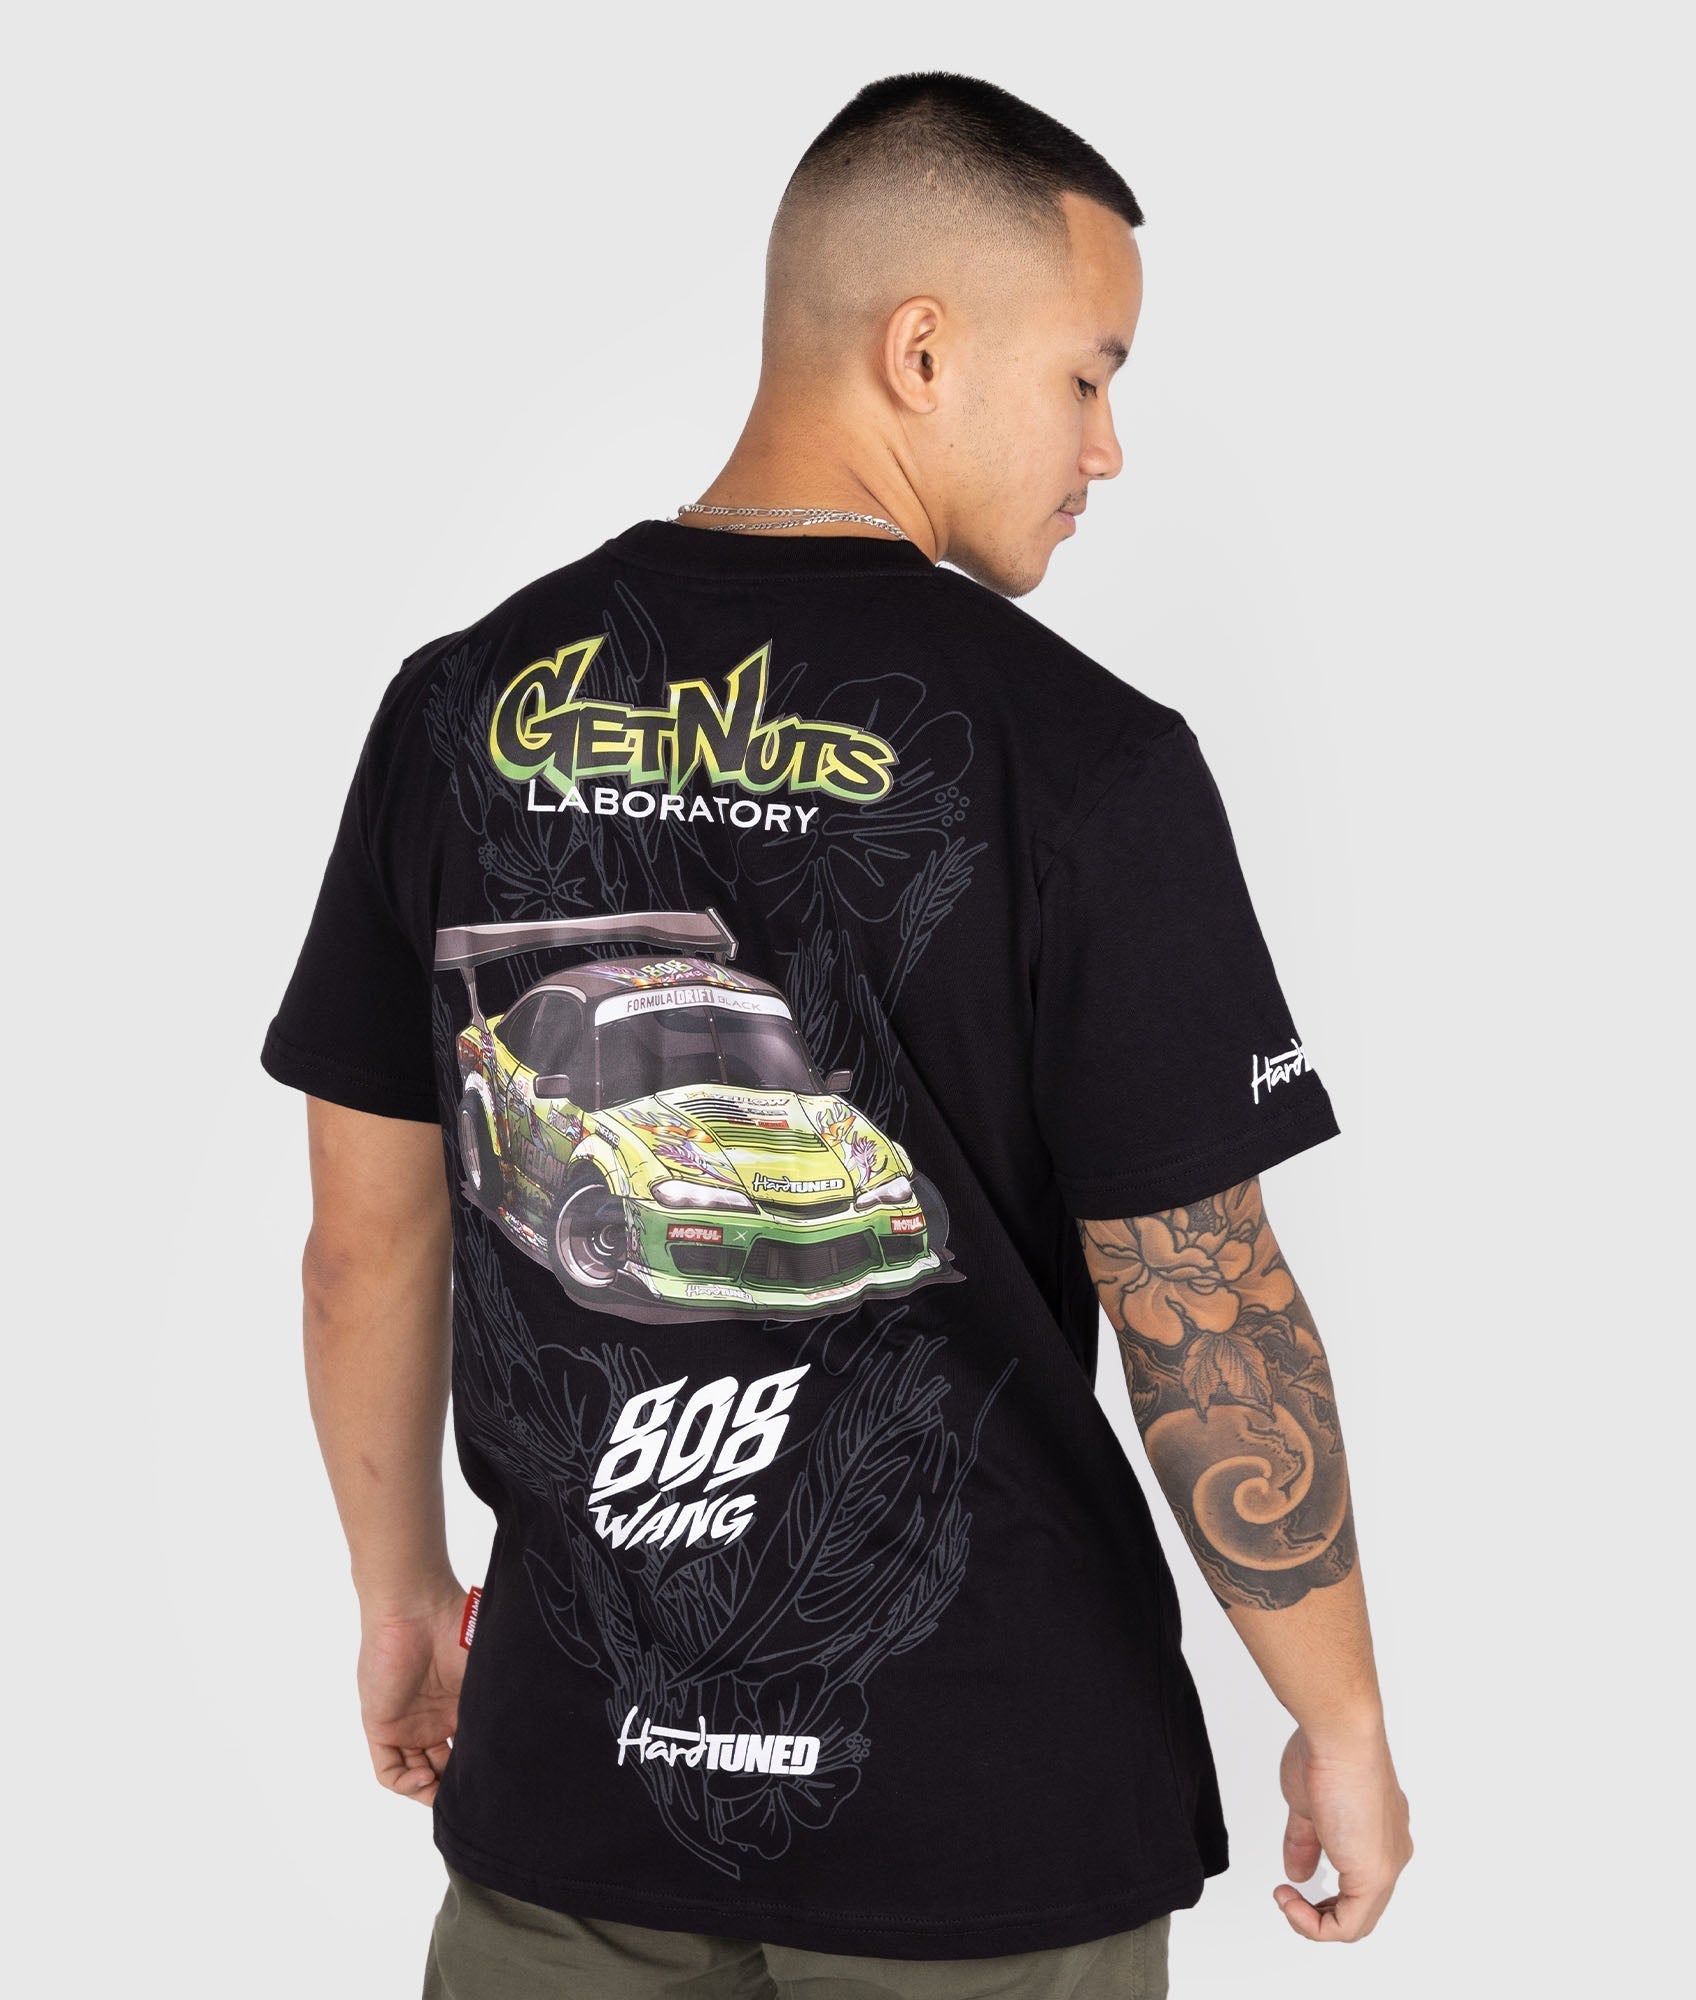 Forrest Wang / Get Nuts Labs Iconic Toon Tee - Hardtuned